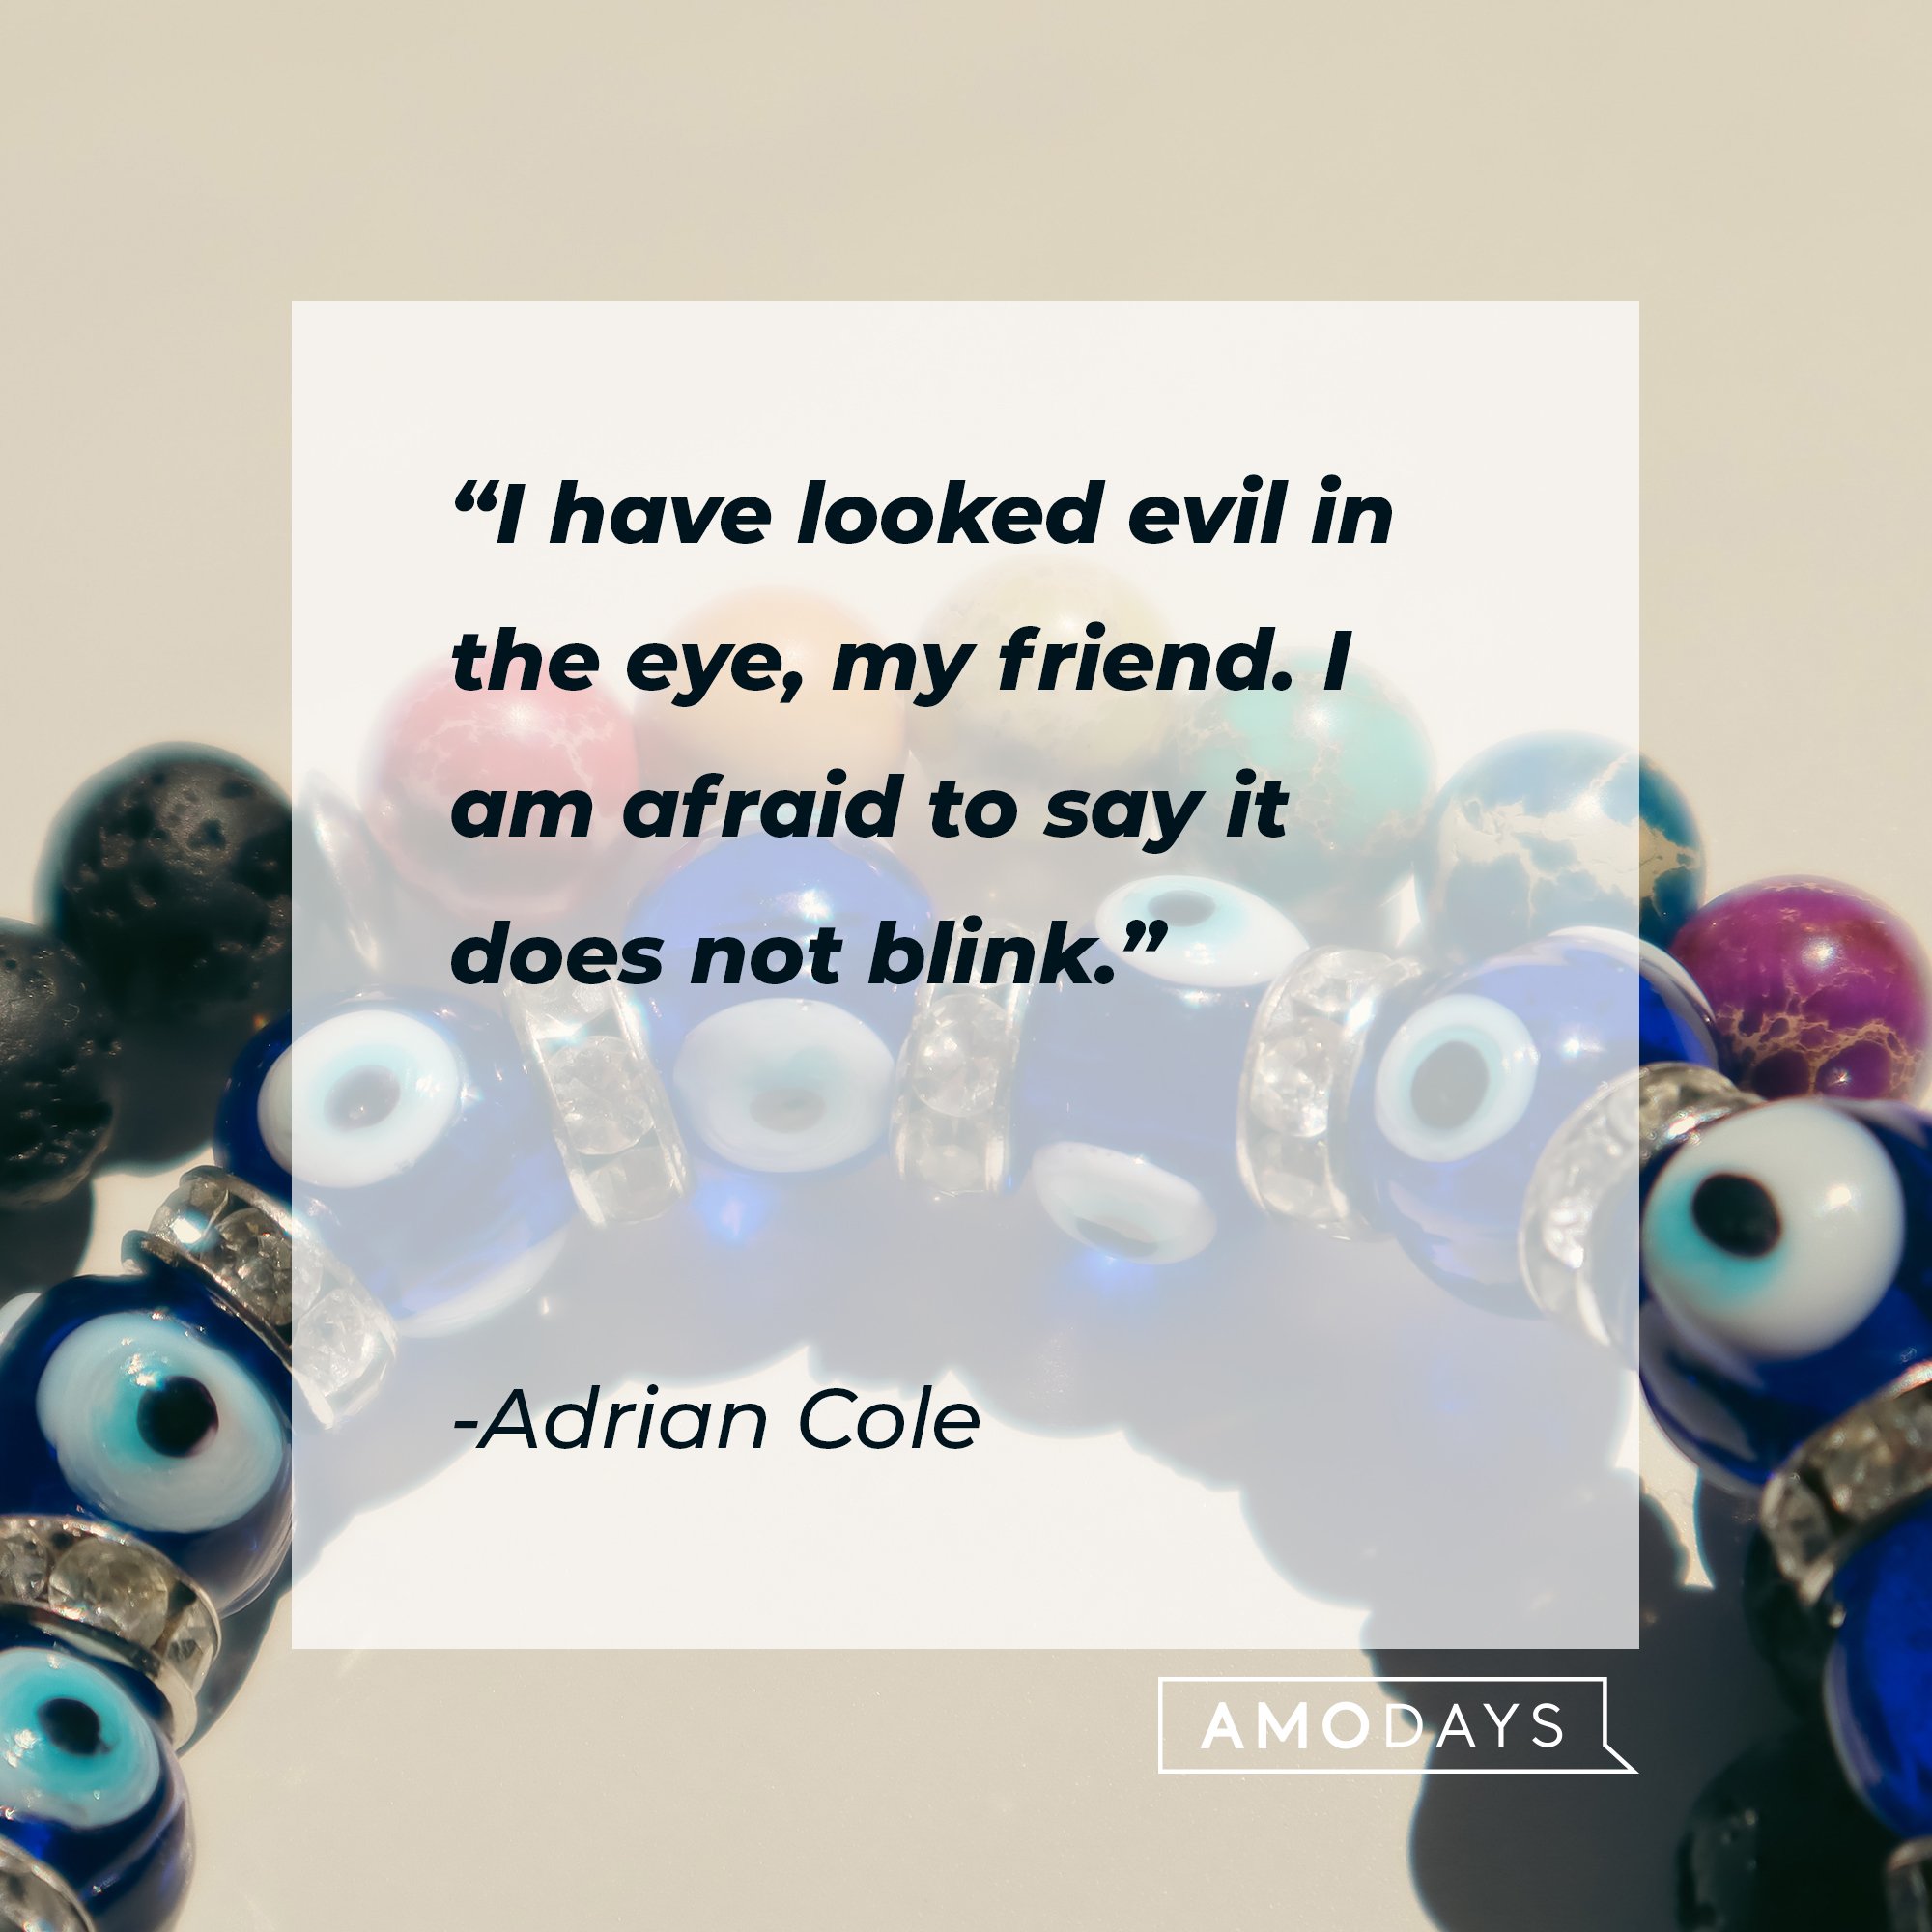 Adrian Cole’s quote: "I have looked evil in the eye, my friend. I am afraid to say it does not blink." | Image: AmoDays